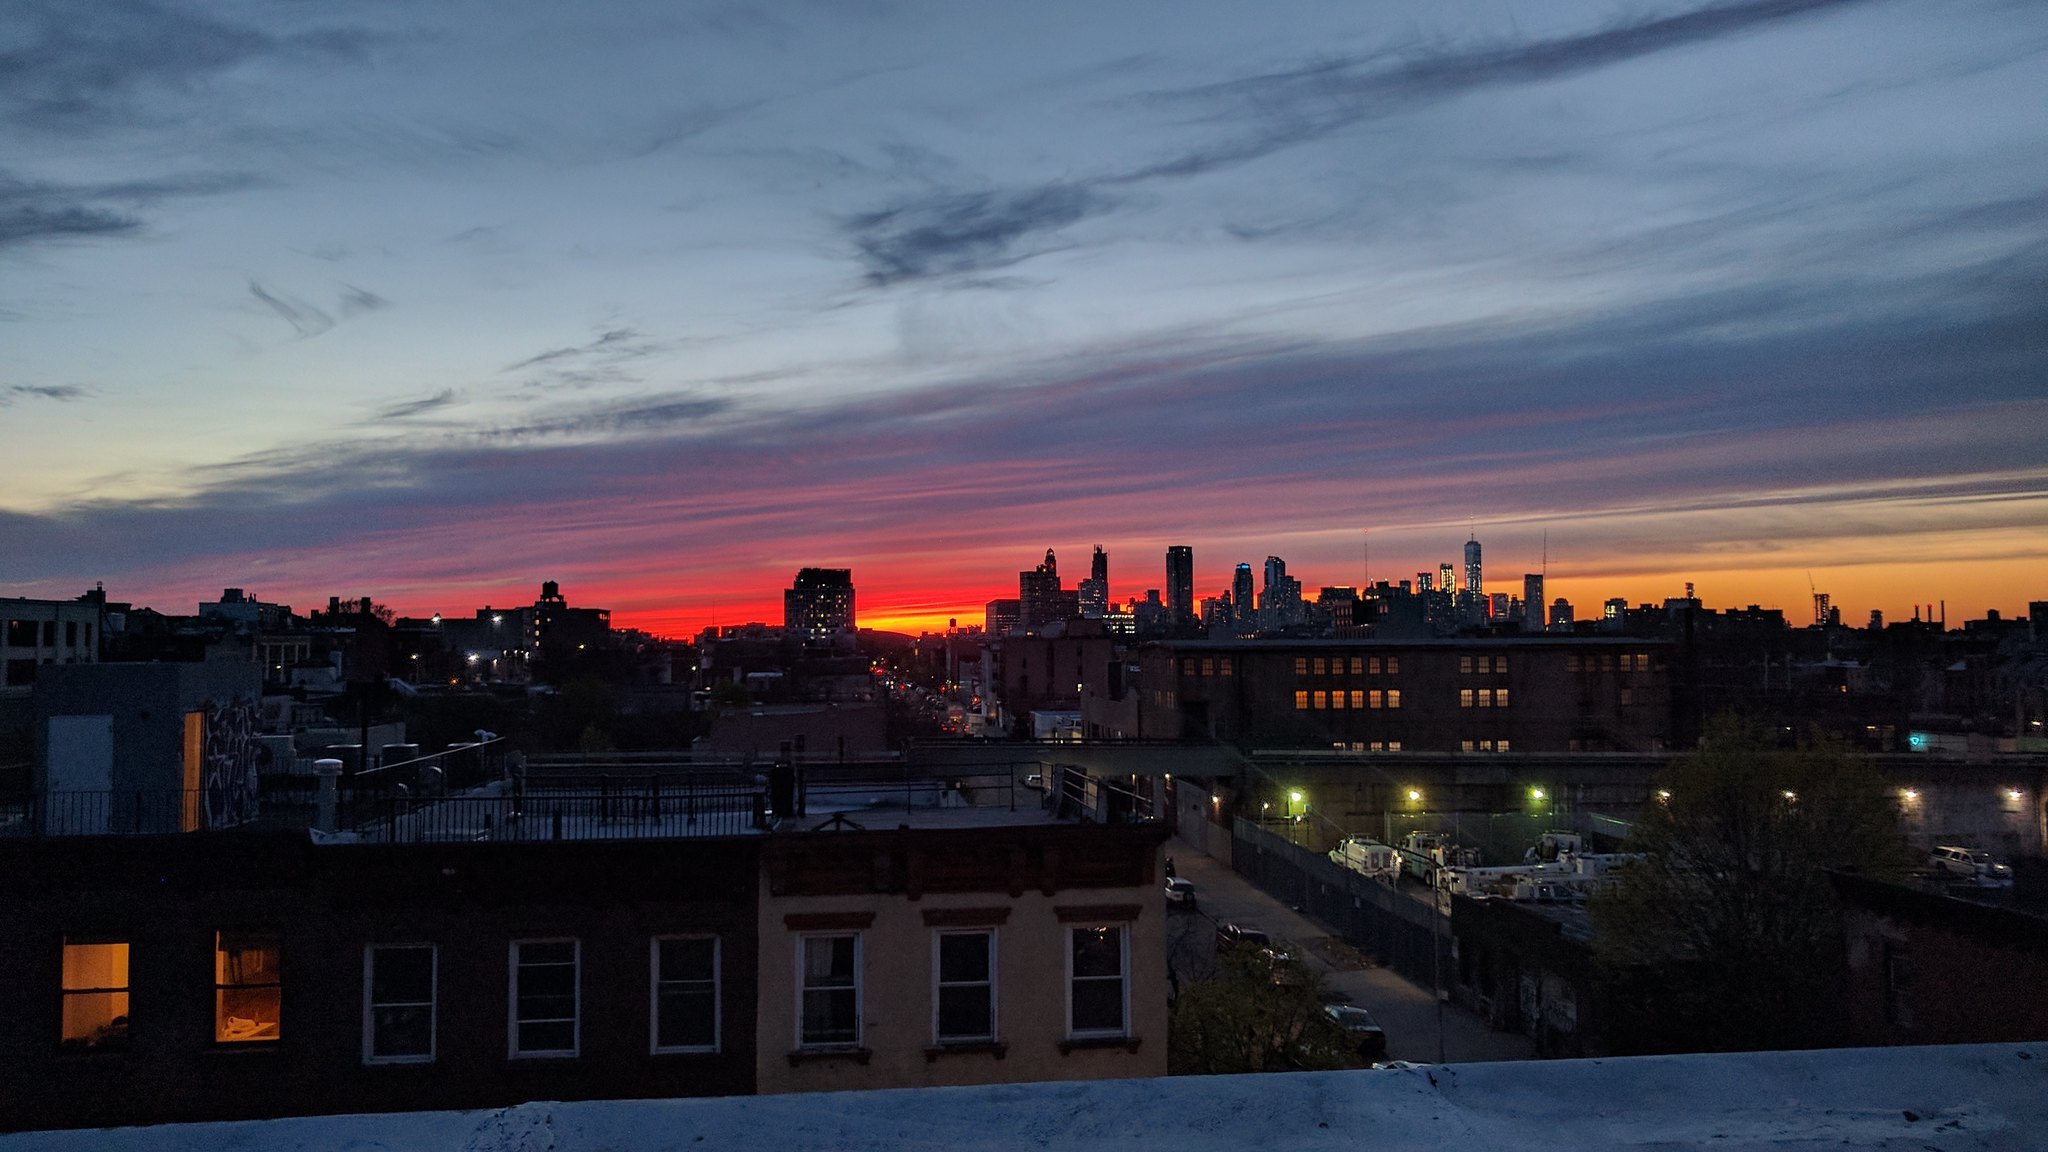 “NYC Sunset” © Drew Tarvin; Creative Commons license